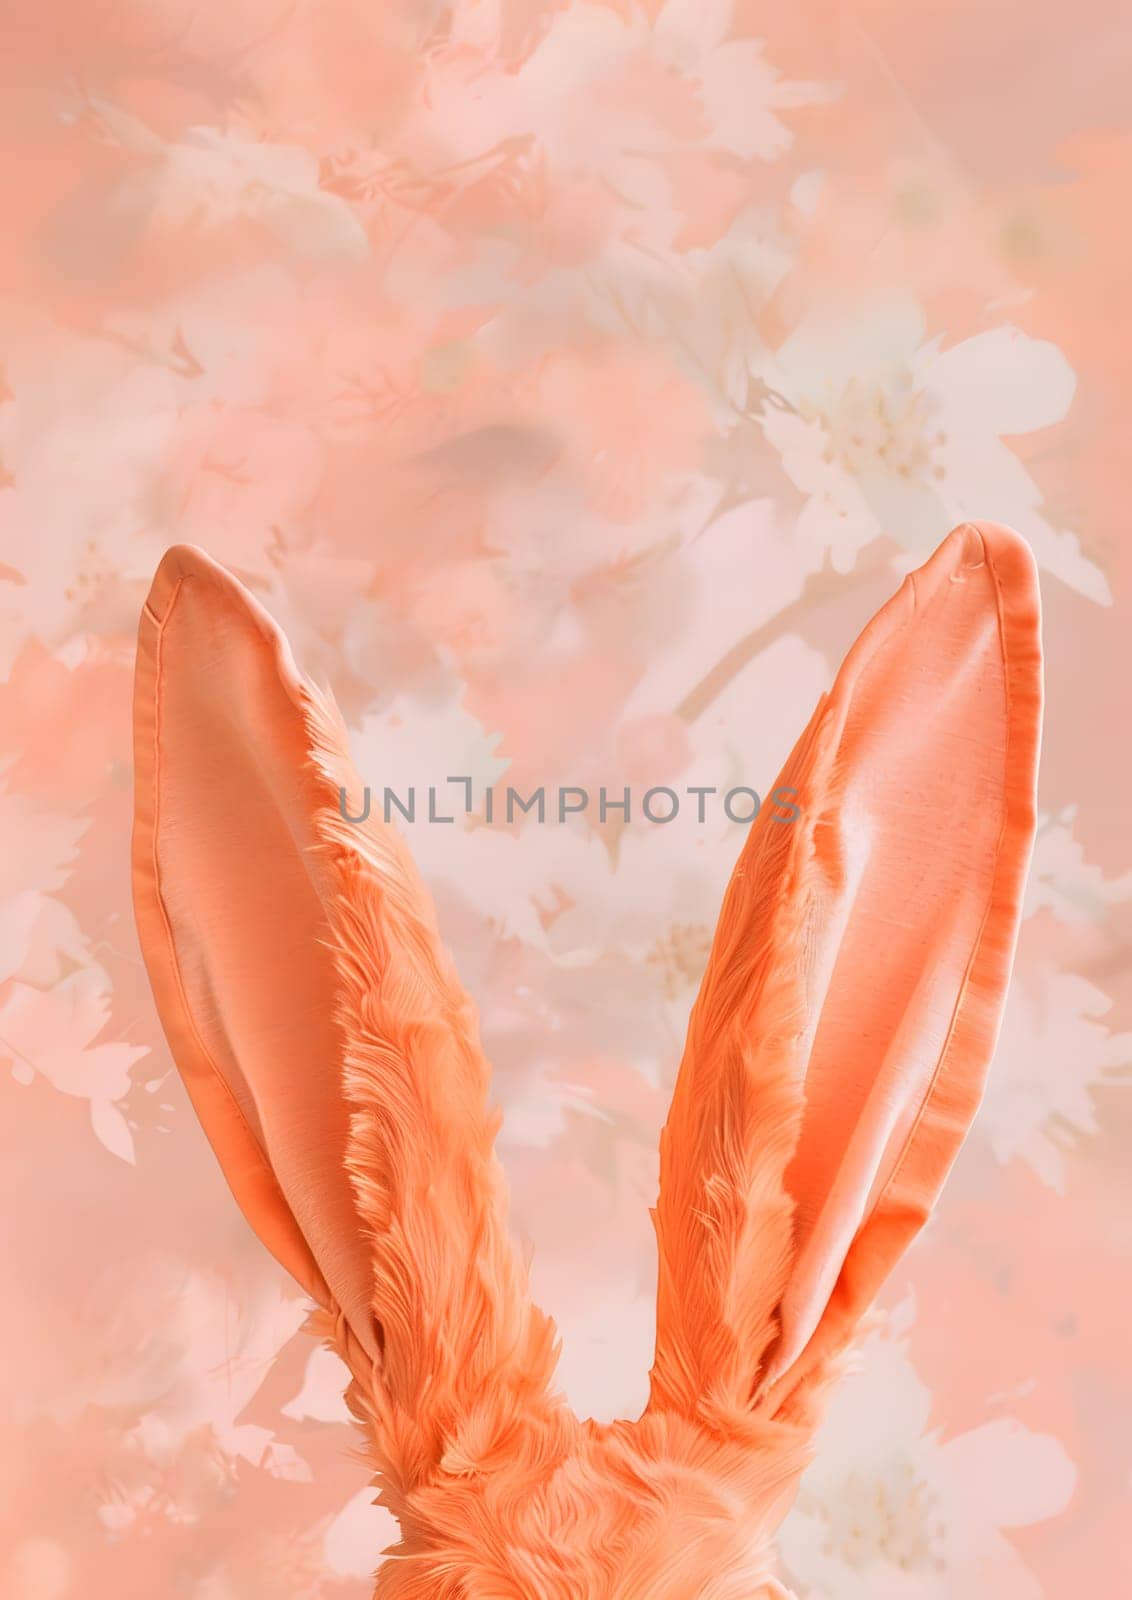 A closeup of a rabbits fluffy ears with orange peach fur, resembling a feathered fashion accessory, set against a vibrant carmine pink background